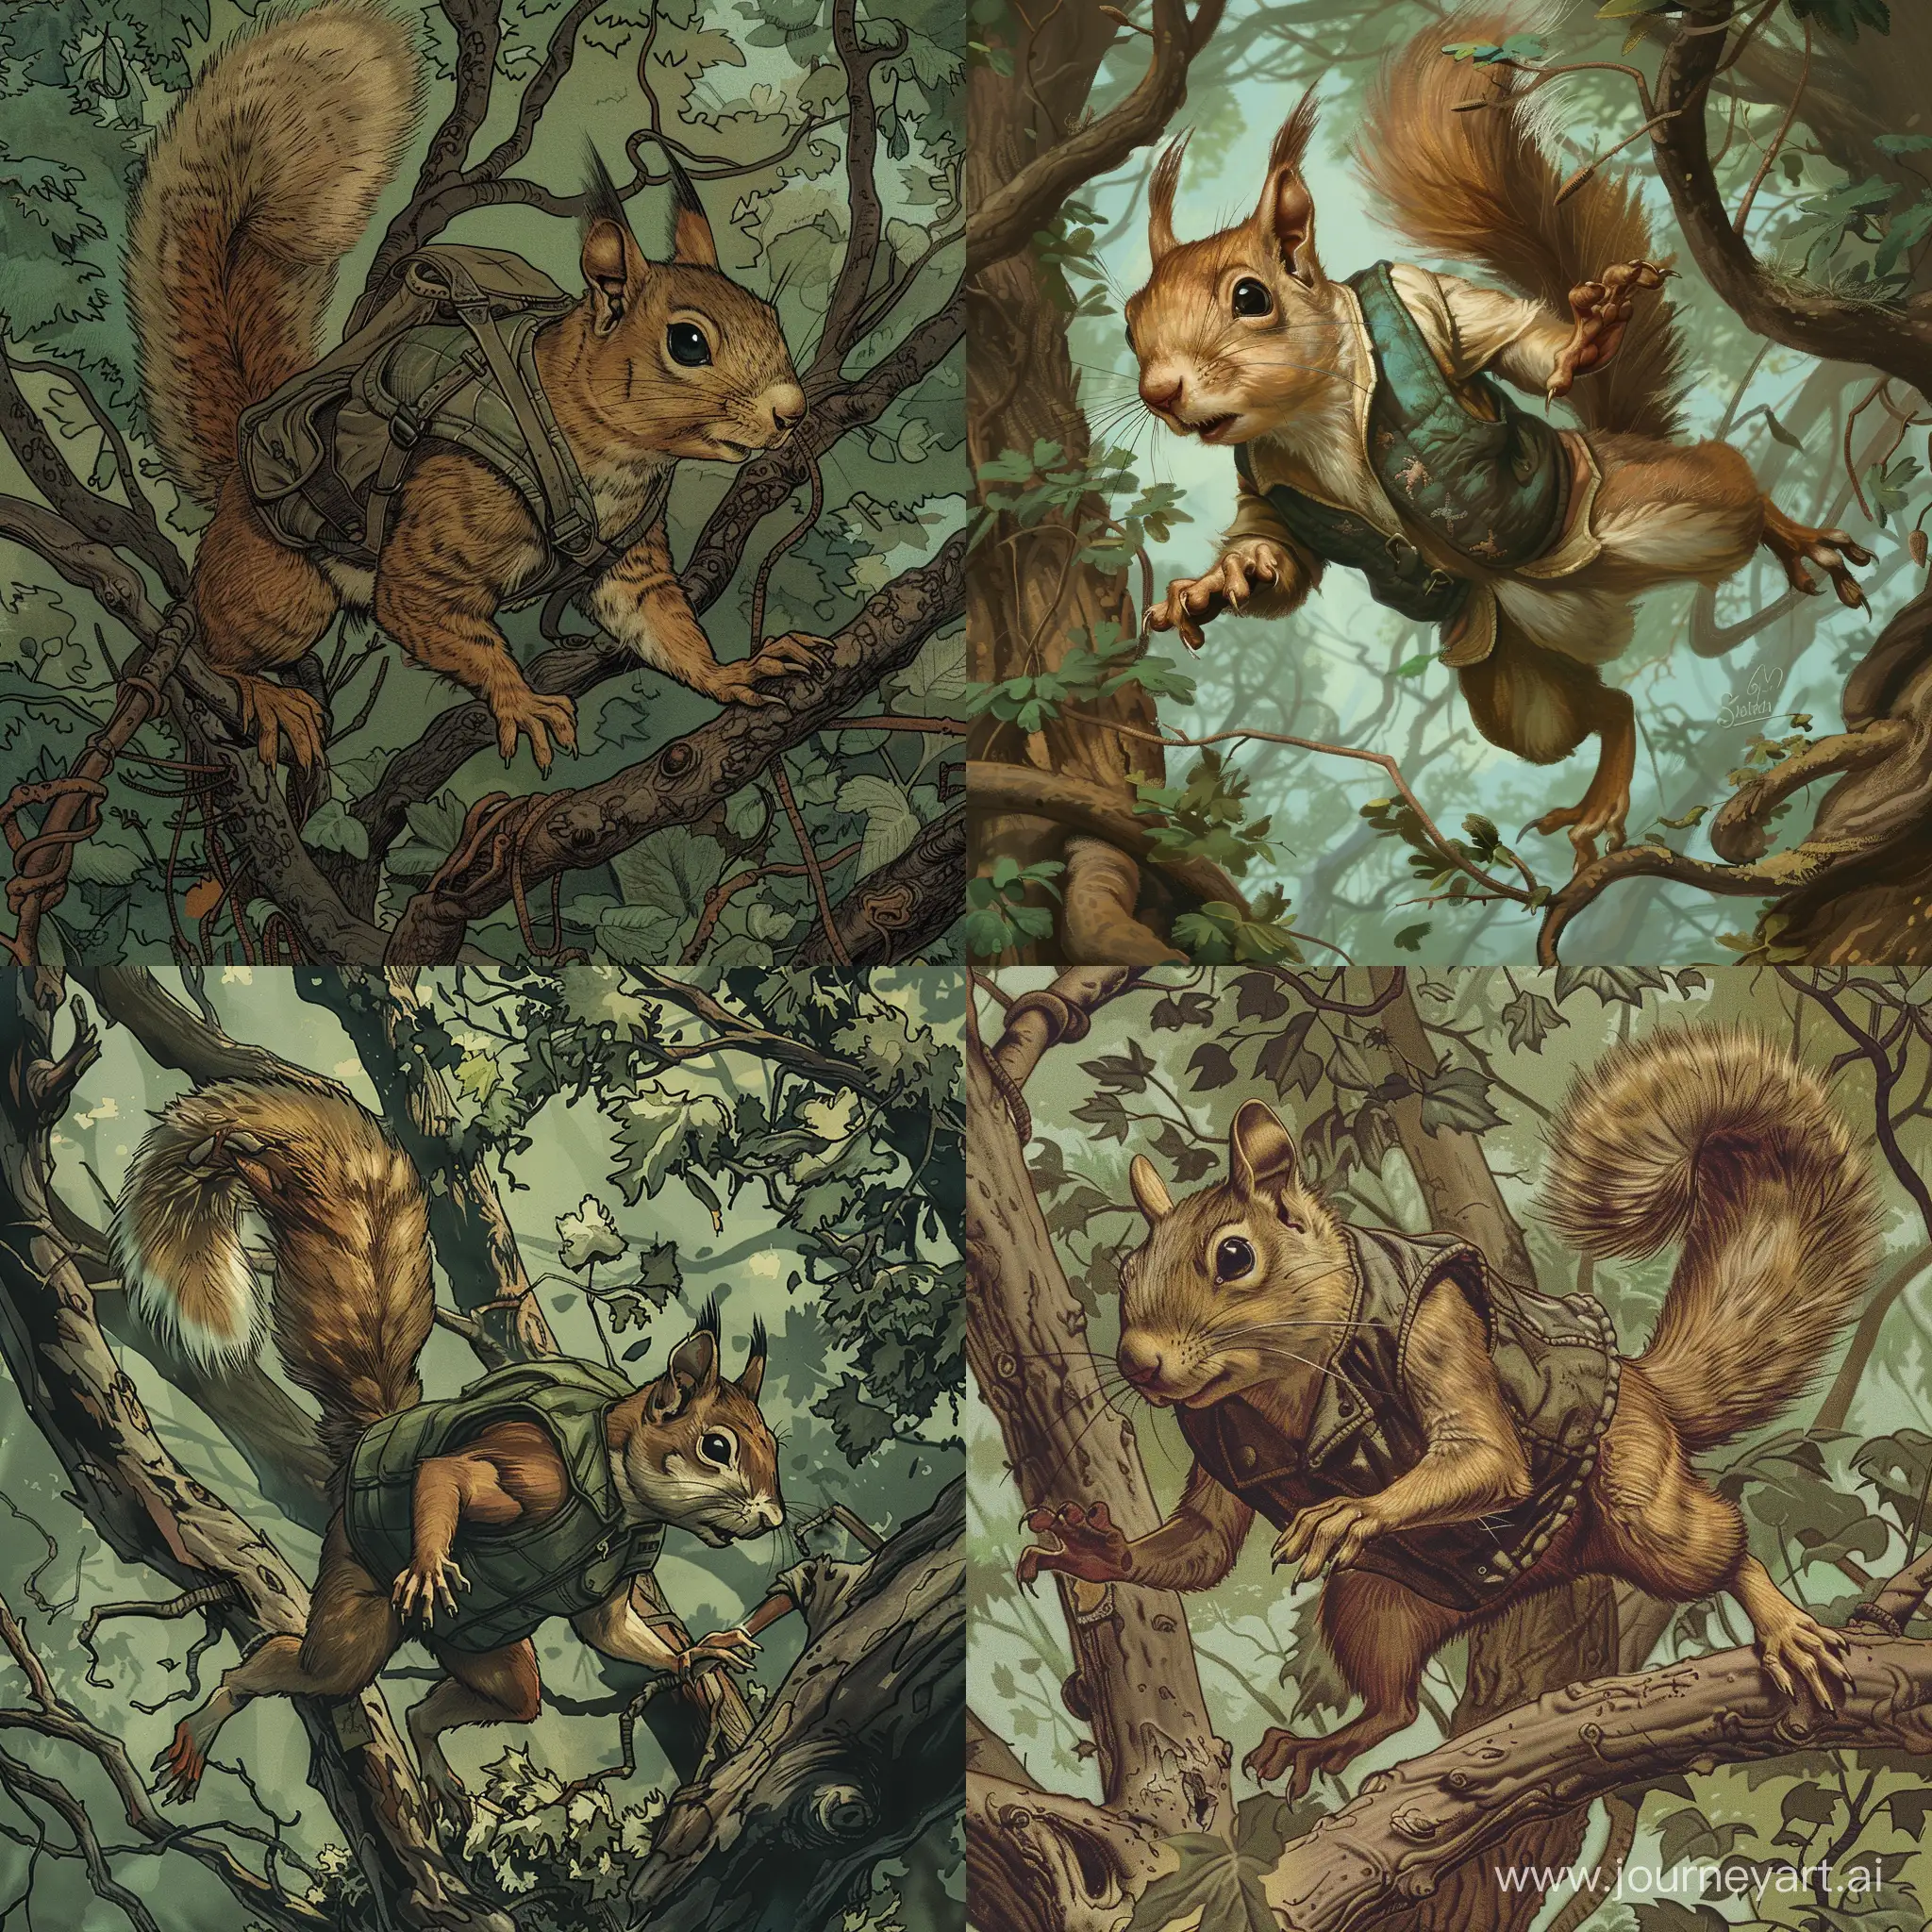 Sasha-the-Swift-Squirrel-Leading-a-Daring-Chase-Through-Whispering-Woods-1970s-Gritty-Fantasy-Art